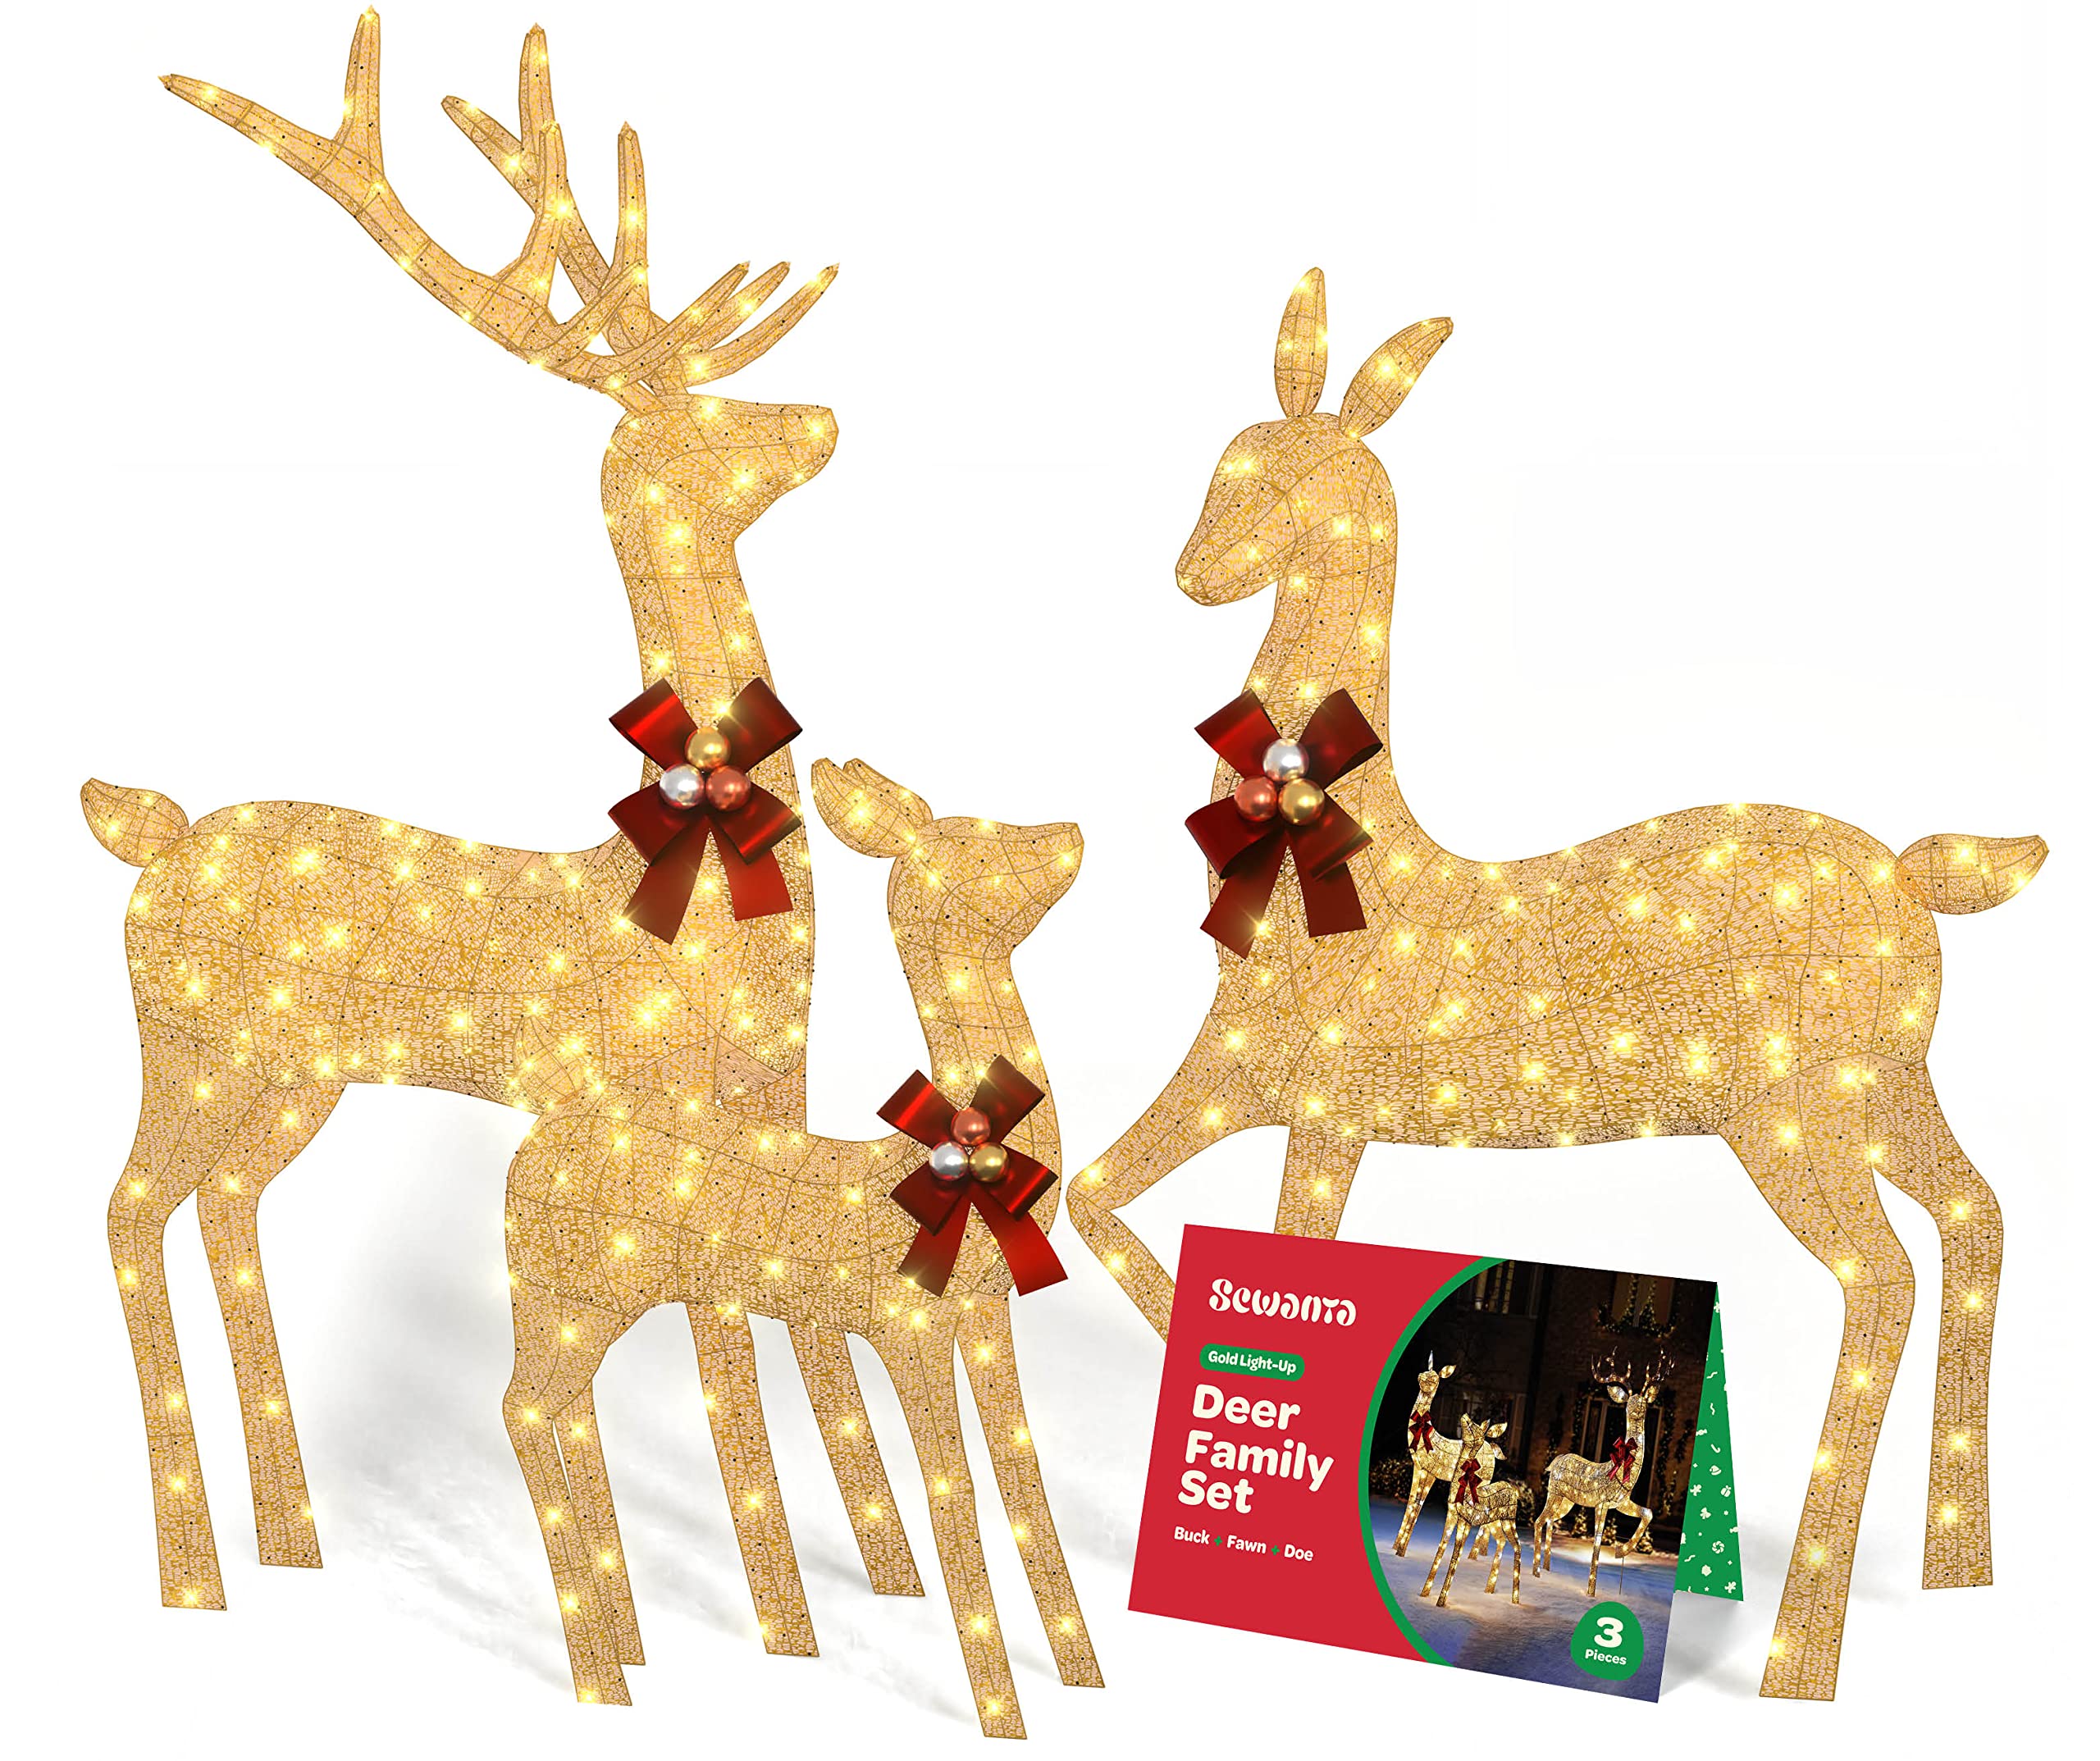 Impressive Reindeer Christmas Decoration Family [Set of 3] Lighted with 365 LED Lights Large all-Weather Christmas Outdoor Decoration Display (Buck Doe and Fawn) With Red Bows/Tie-Down Stakes - Gold. christmas decorations outdoor reindeer  - Very Good